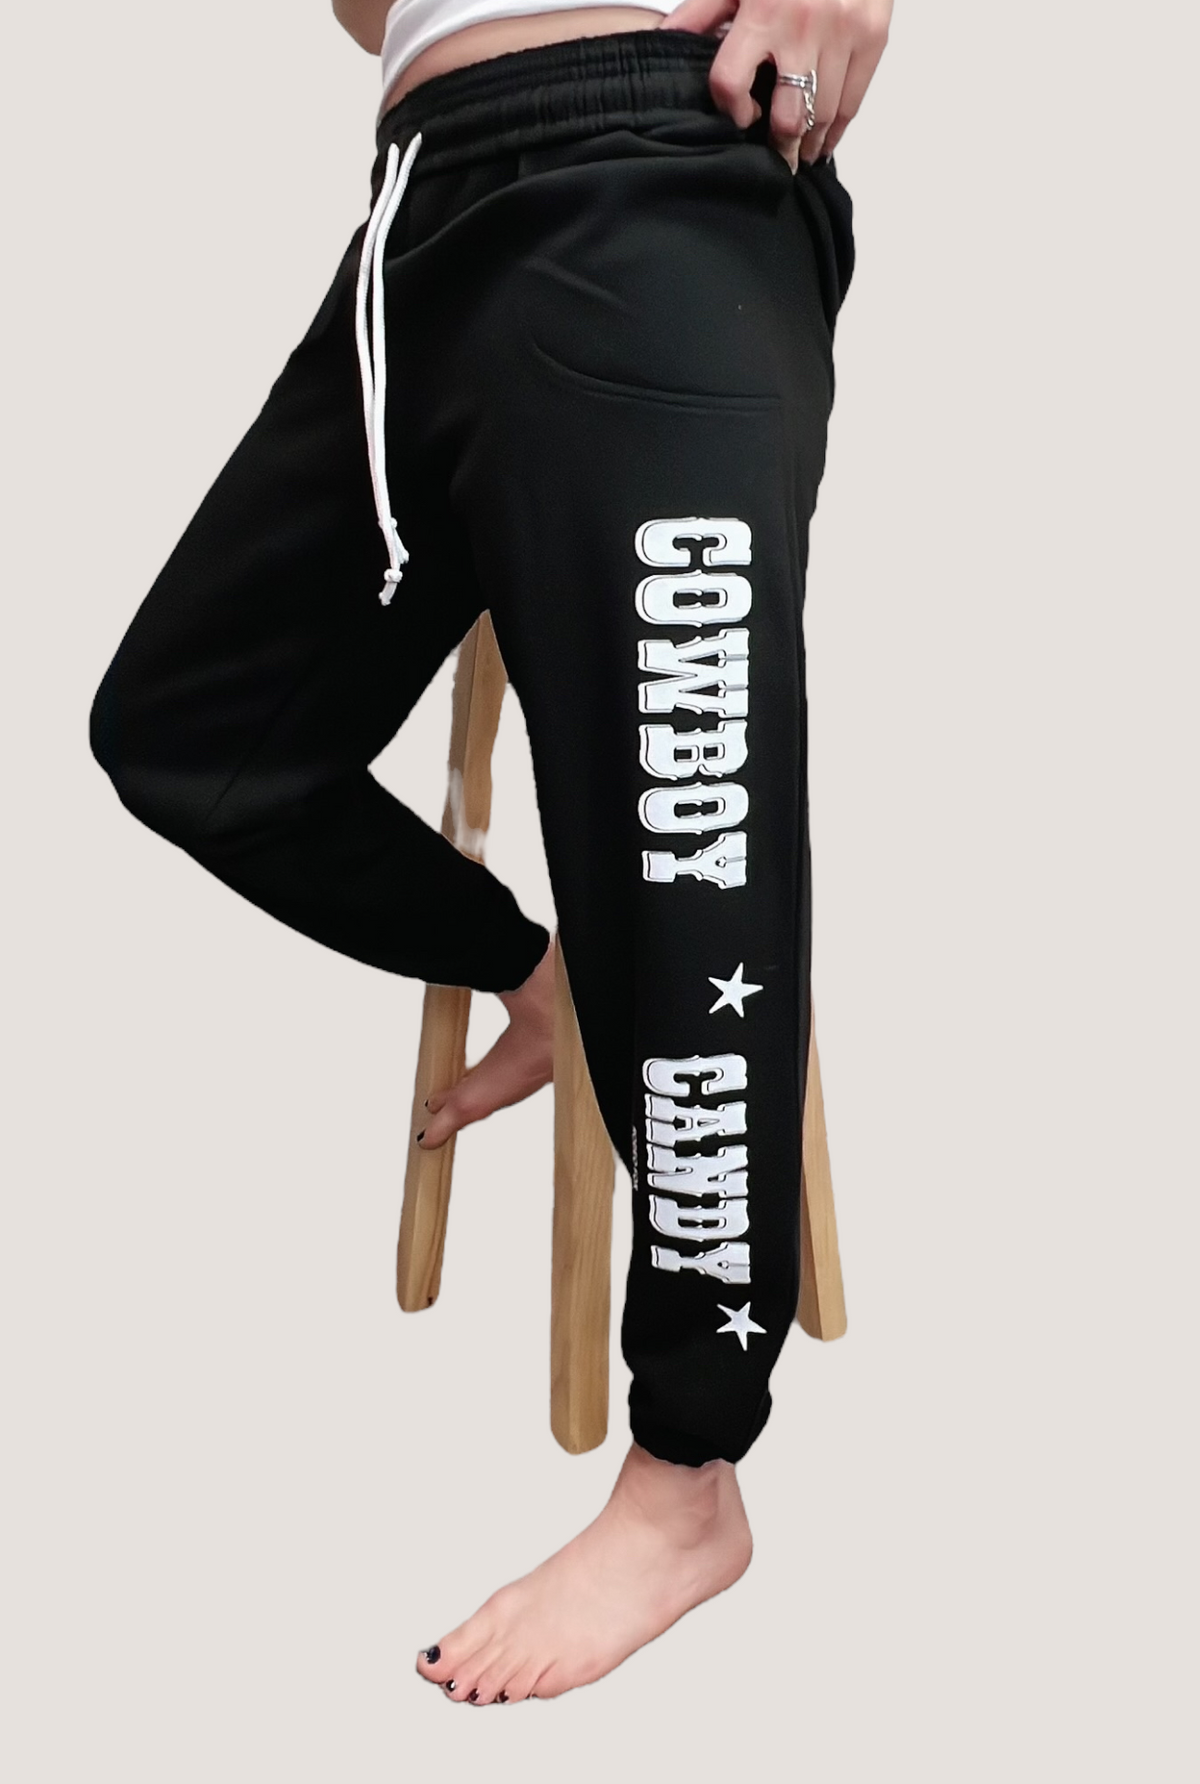 COWBOY CANDY COUNTRY COWGIRL PINUP PANTS